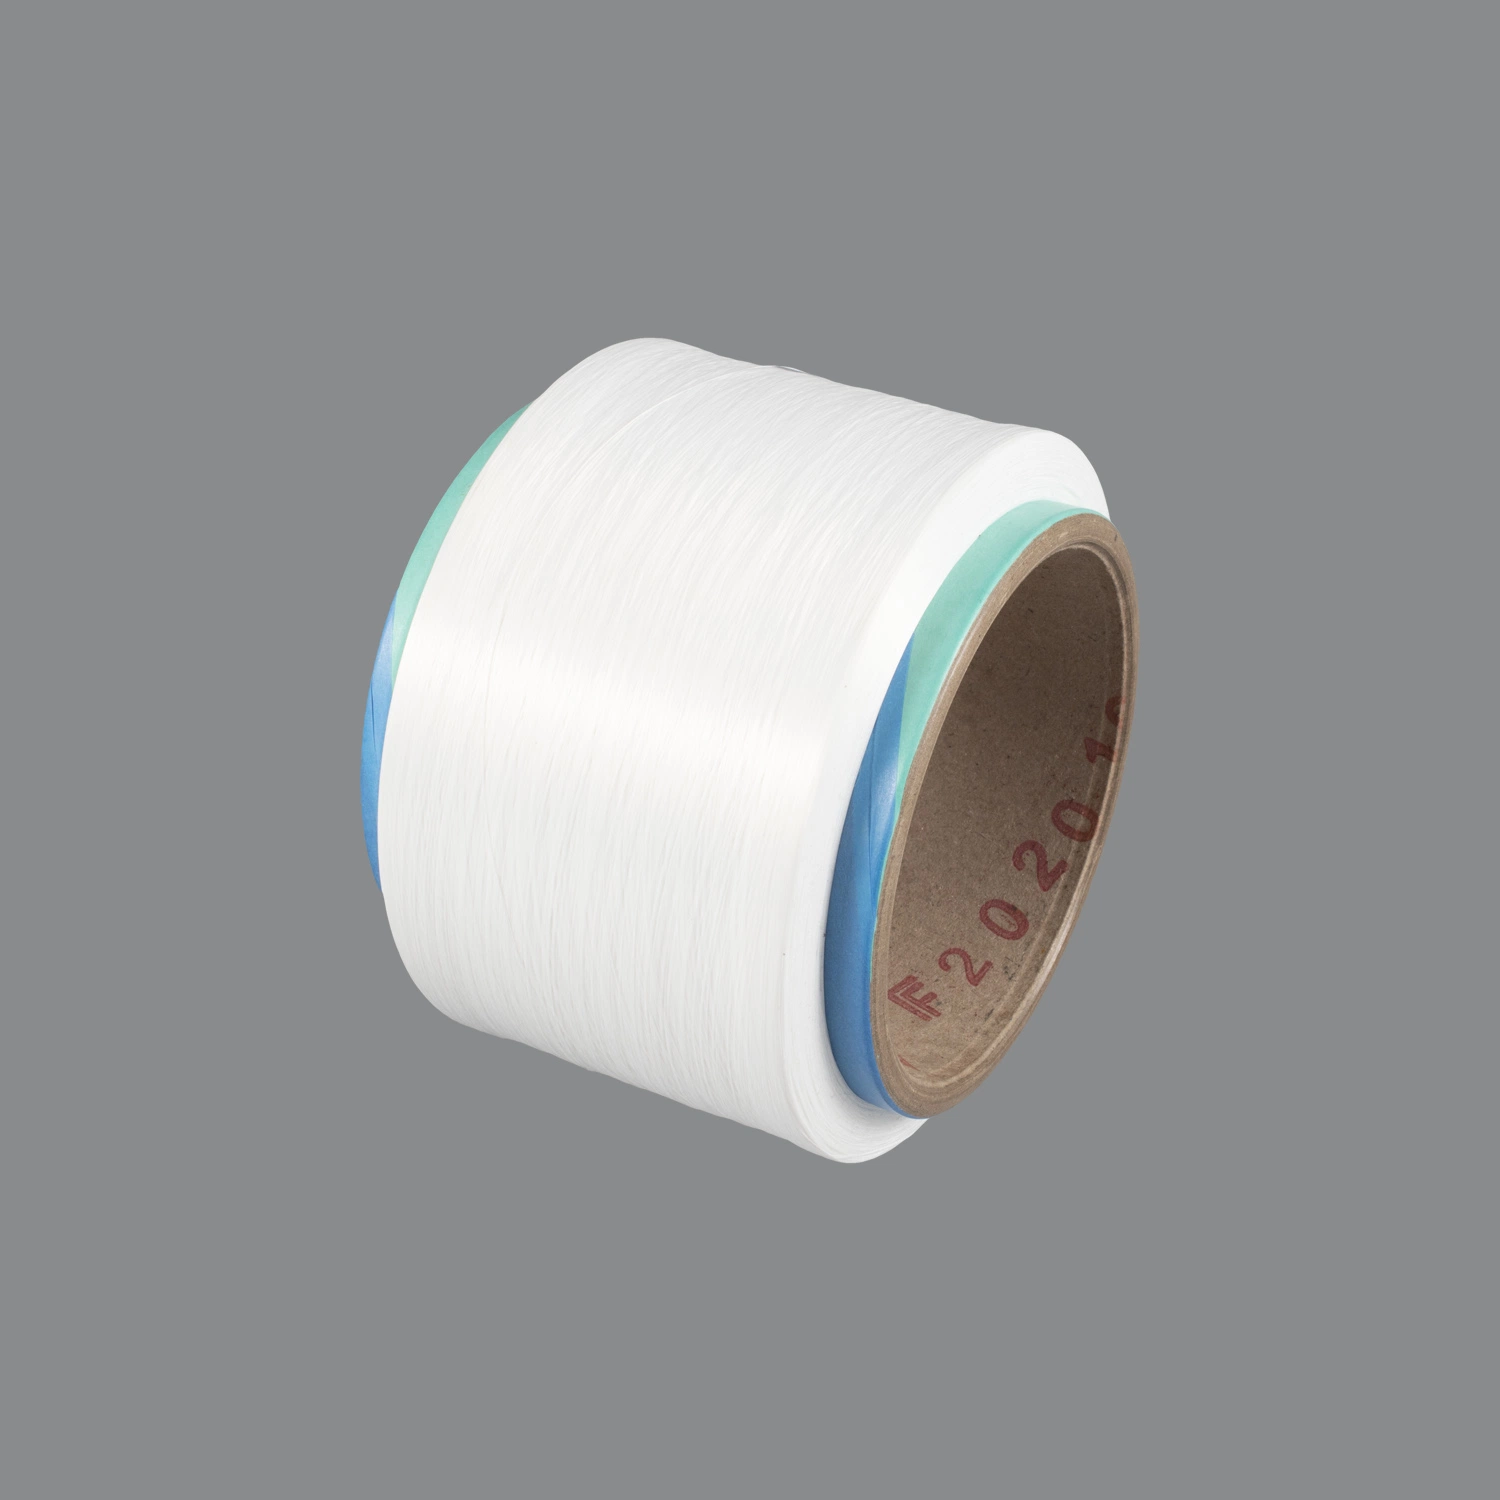 100% Recycled Polyester Yarn POY 750dt / 144f Dtysd/BRT/Fd/CD with Grs Certificate China Manufacturer